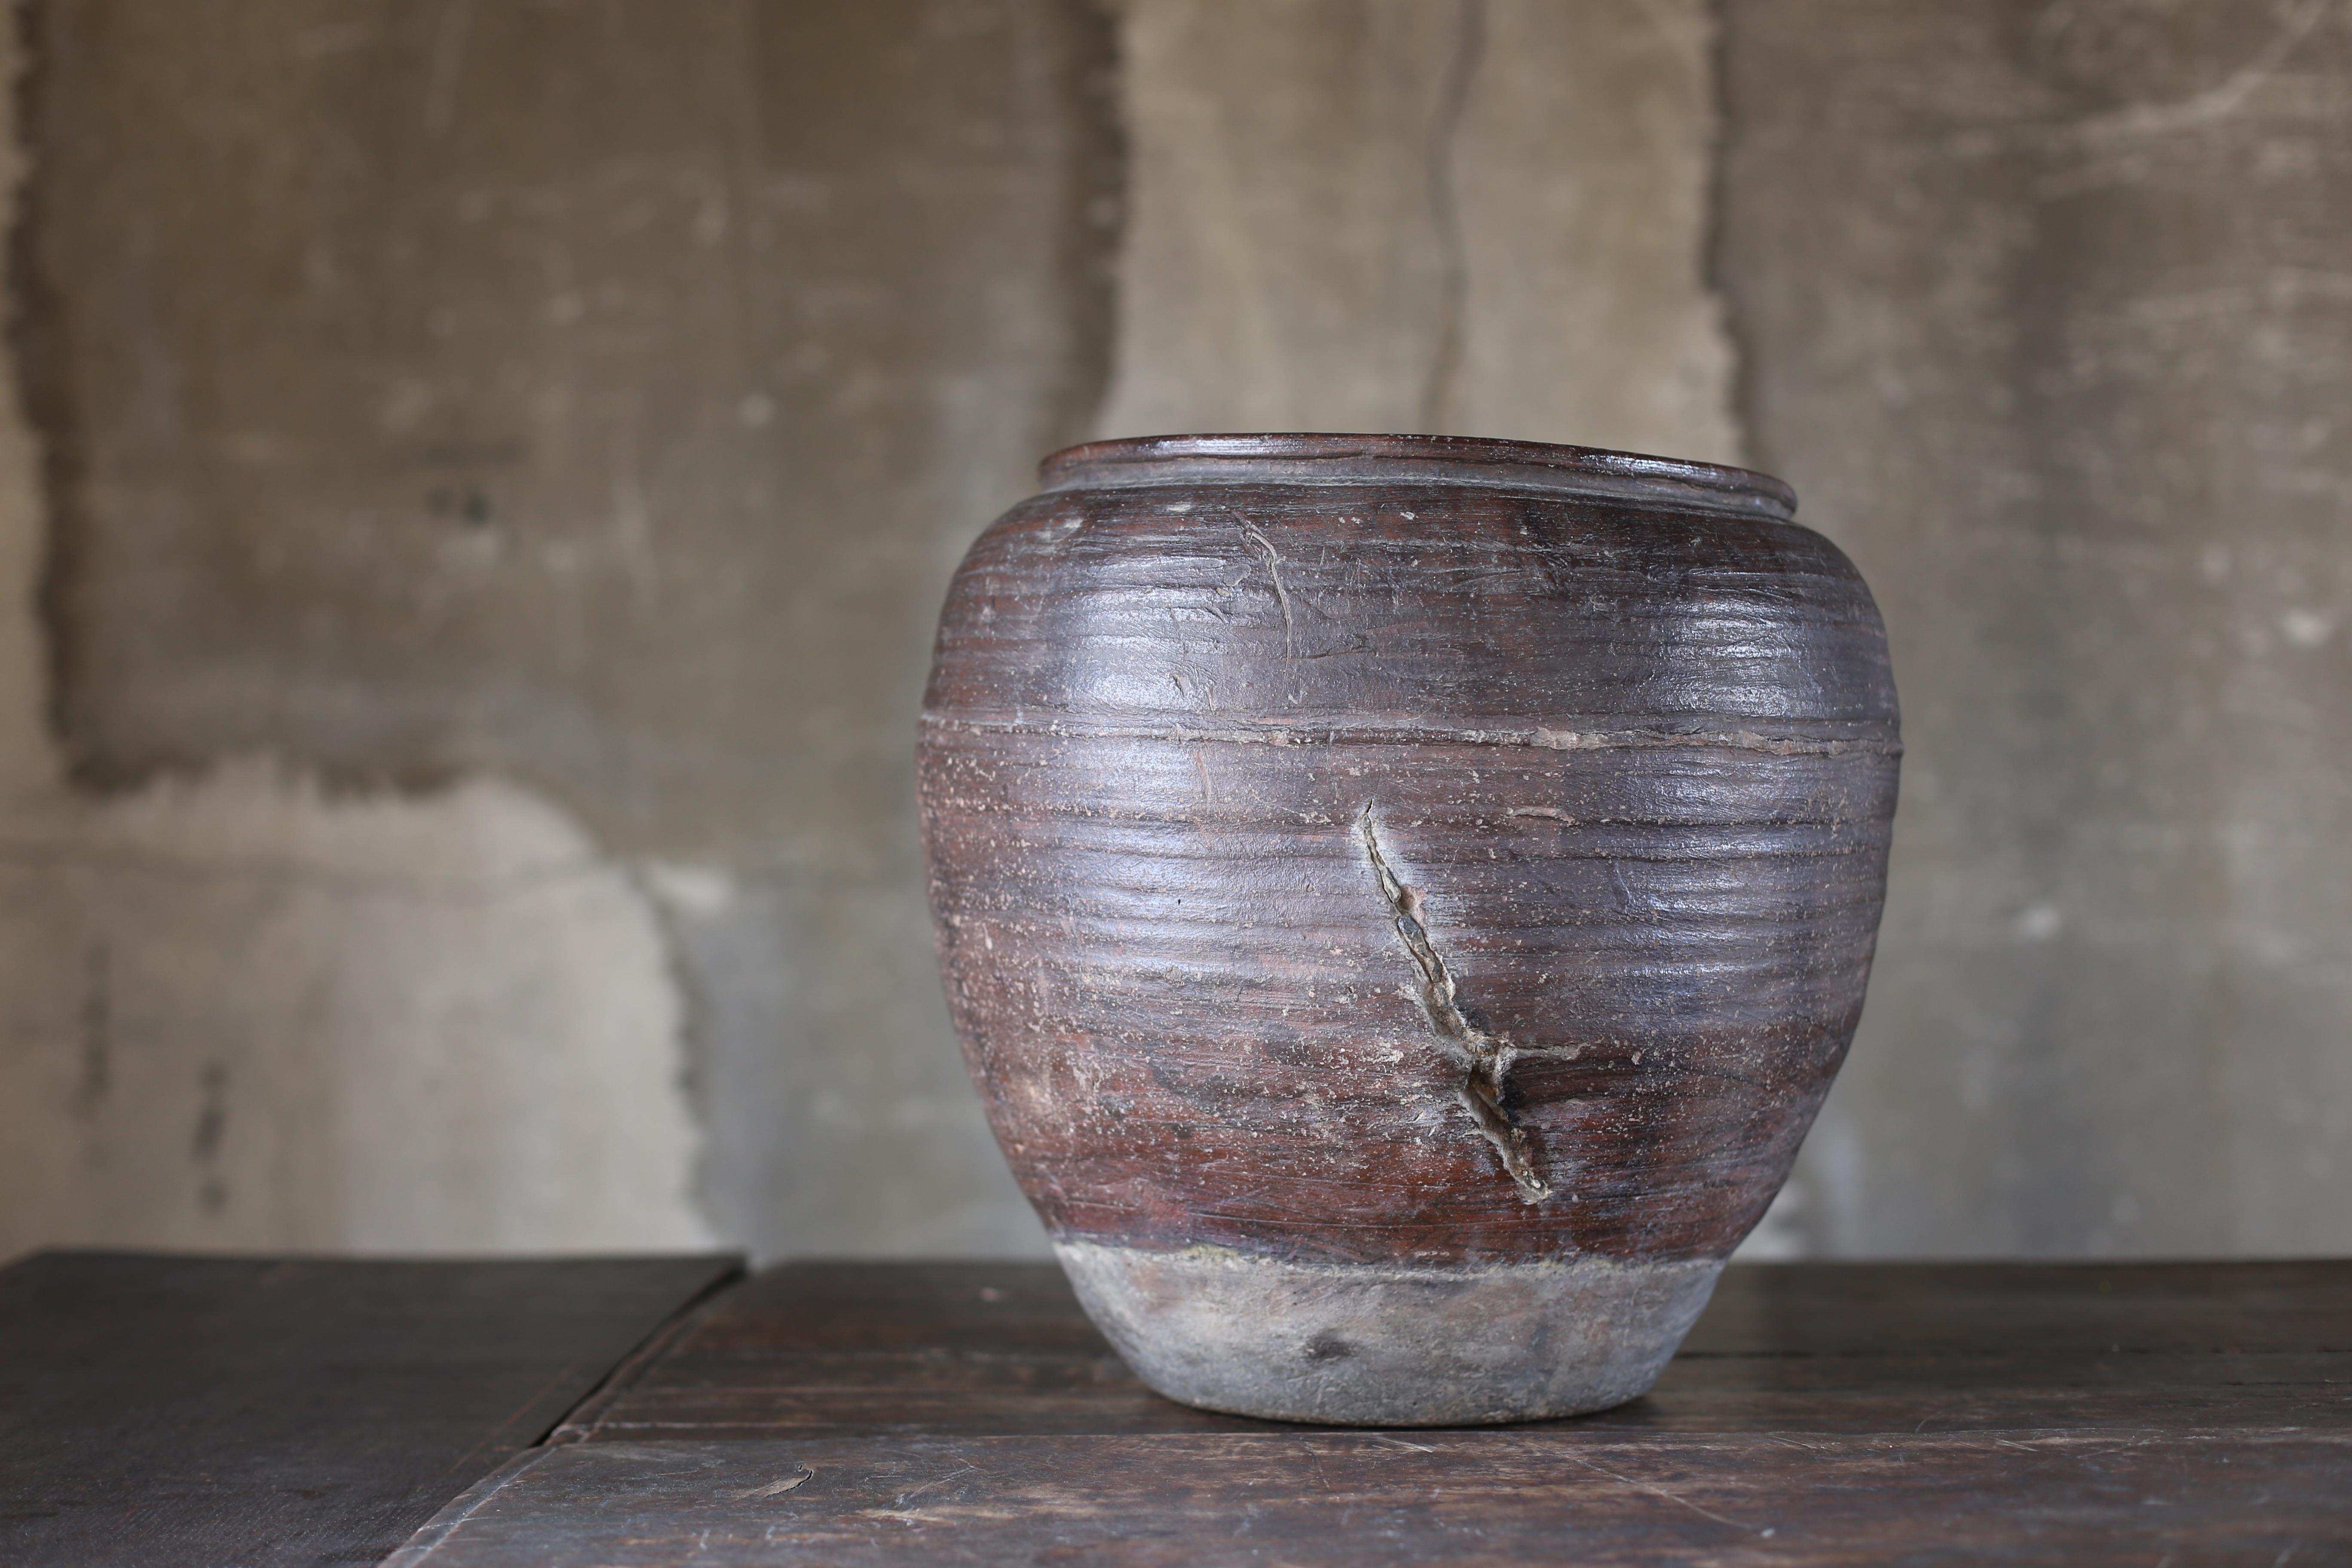 It is an old jar baked in Japan.
It seems to be in the Edo period (1700s-1800s).

The unique distorted shape is beautiful.
The color and balance of the glaze are also exquisite and wonderful.
It has two beautiful ripped.They make us feel